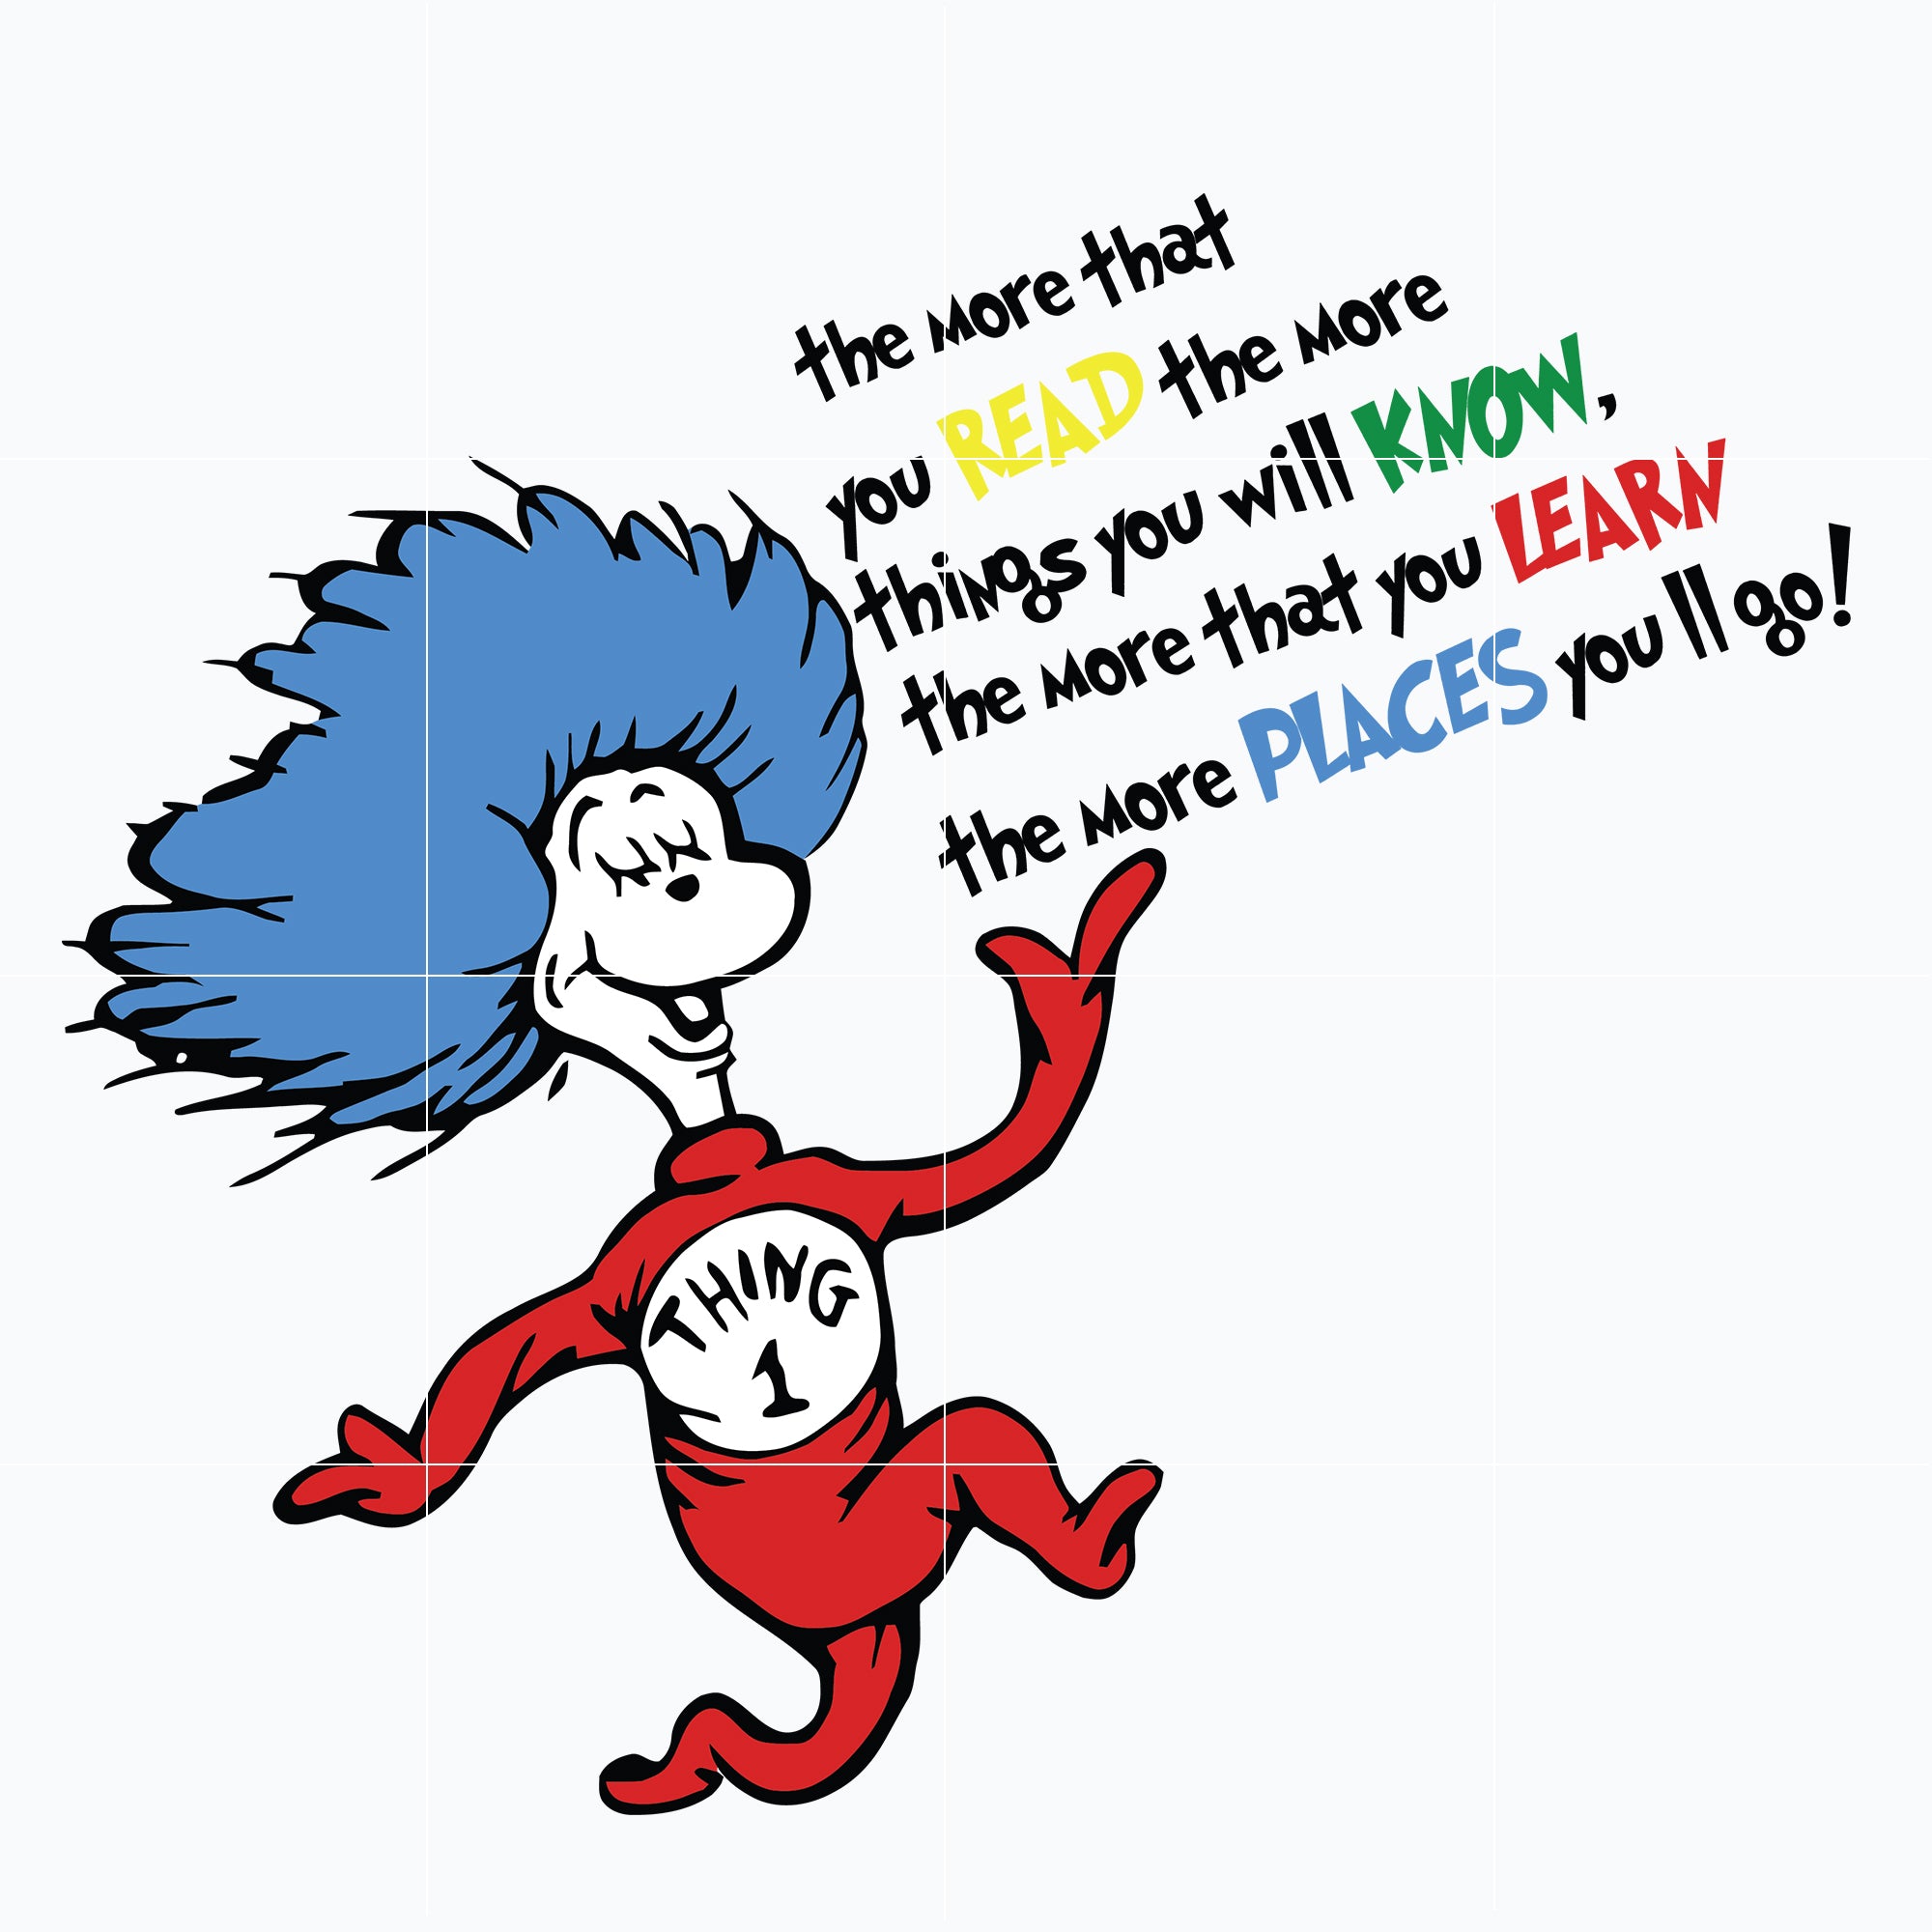 The more that you read, the more things you will know, the more that you learn, the more places you'll go svg, dr seuss svg, png, dxf, eps digital file